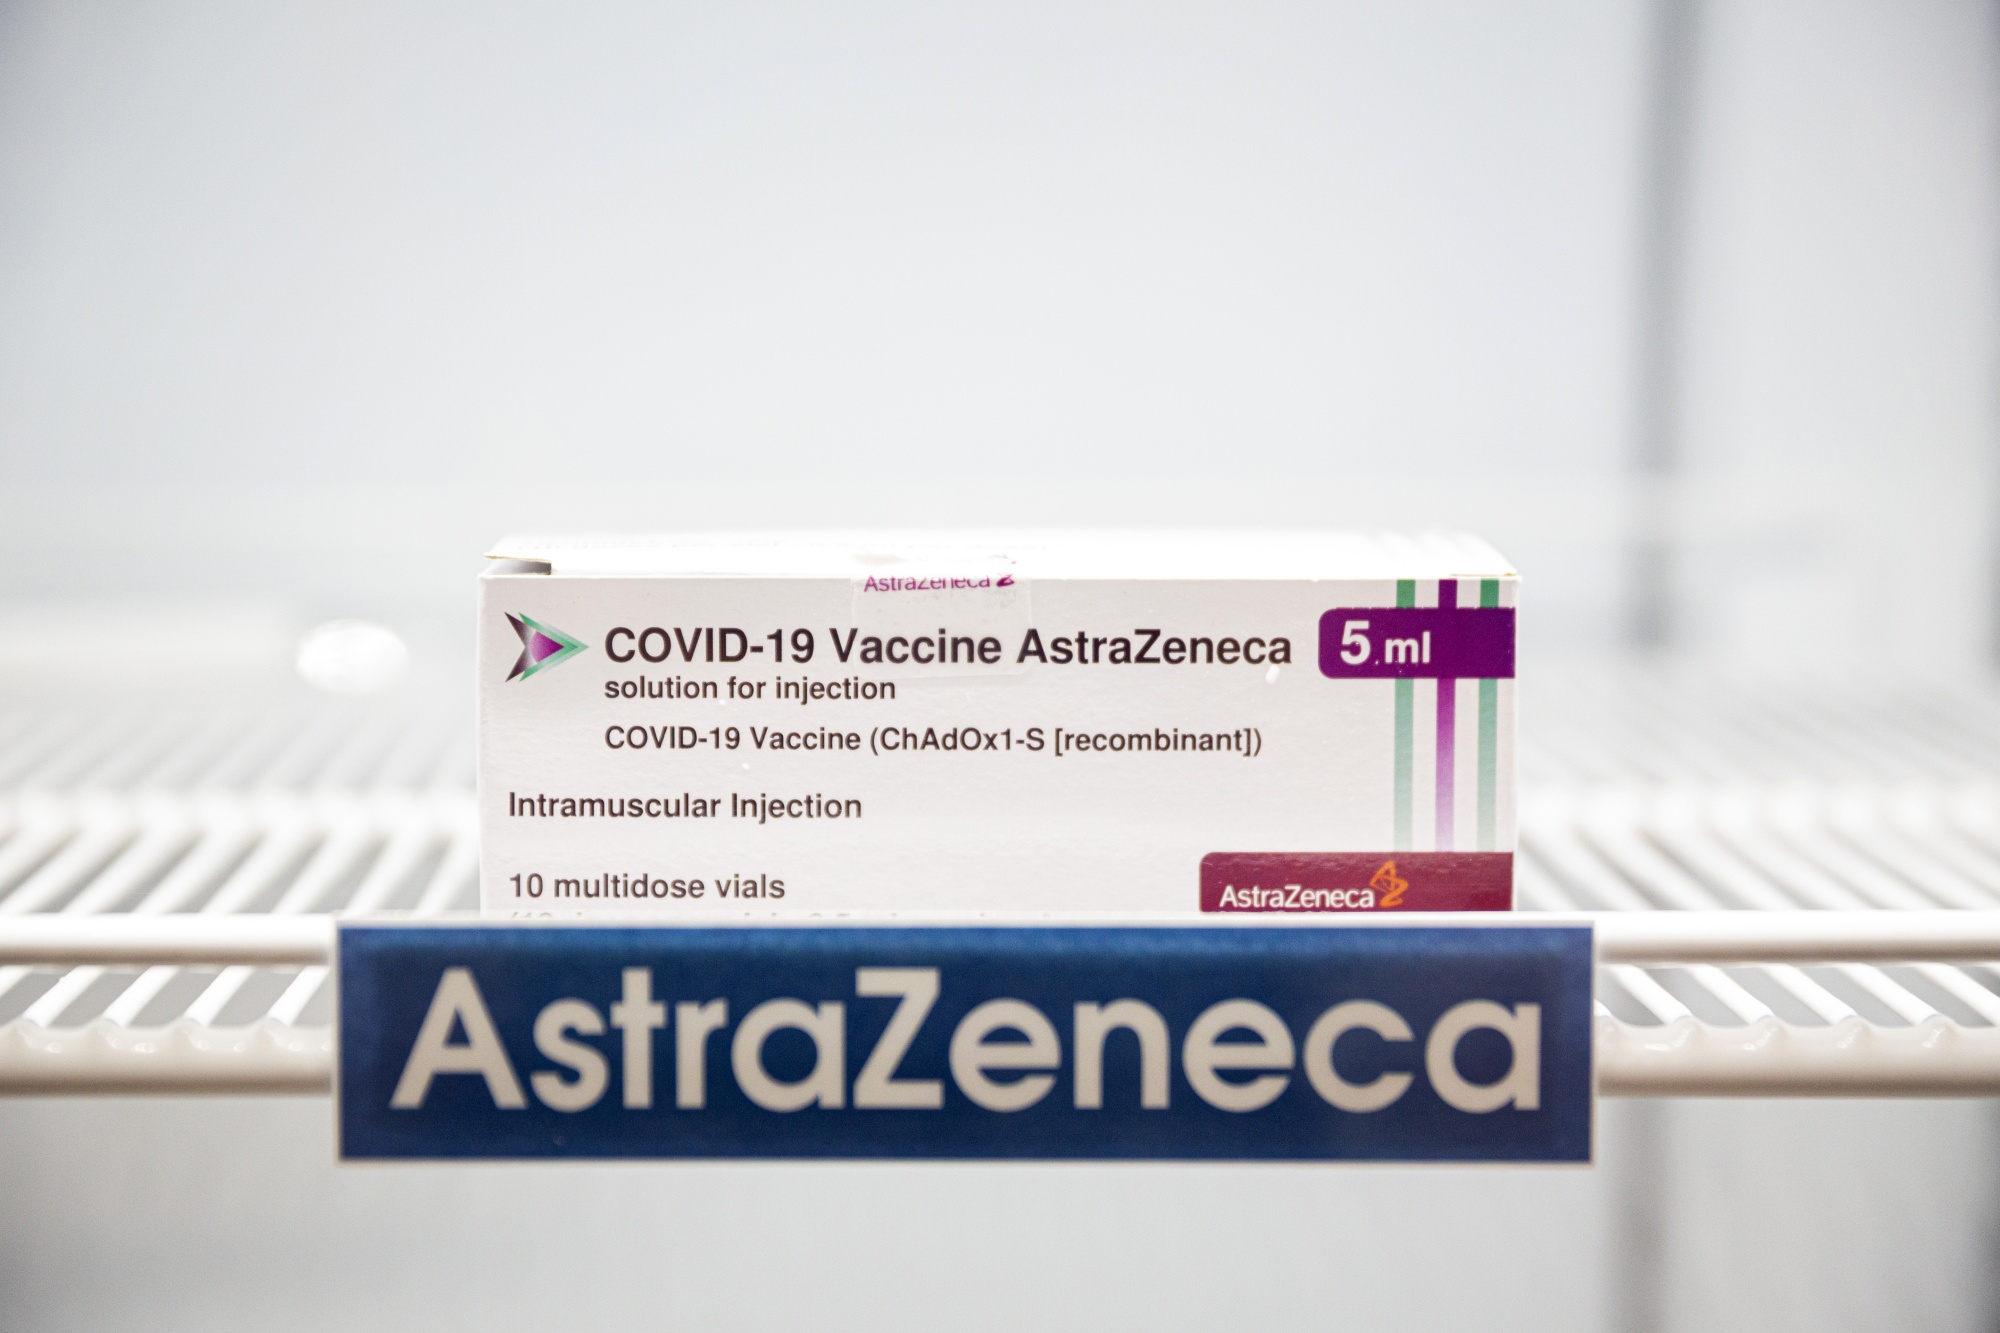 Germany Suspends Astrazeneca Covid Vaccine After Blood Clotting Reports Bloomberg